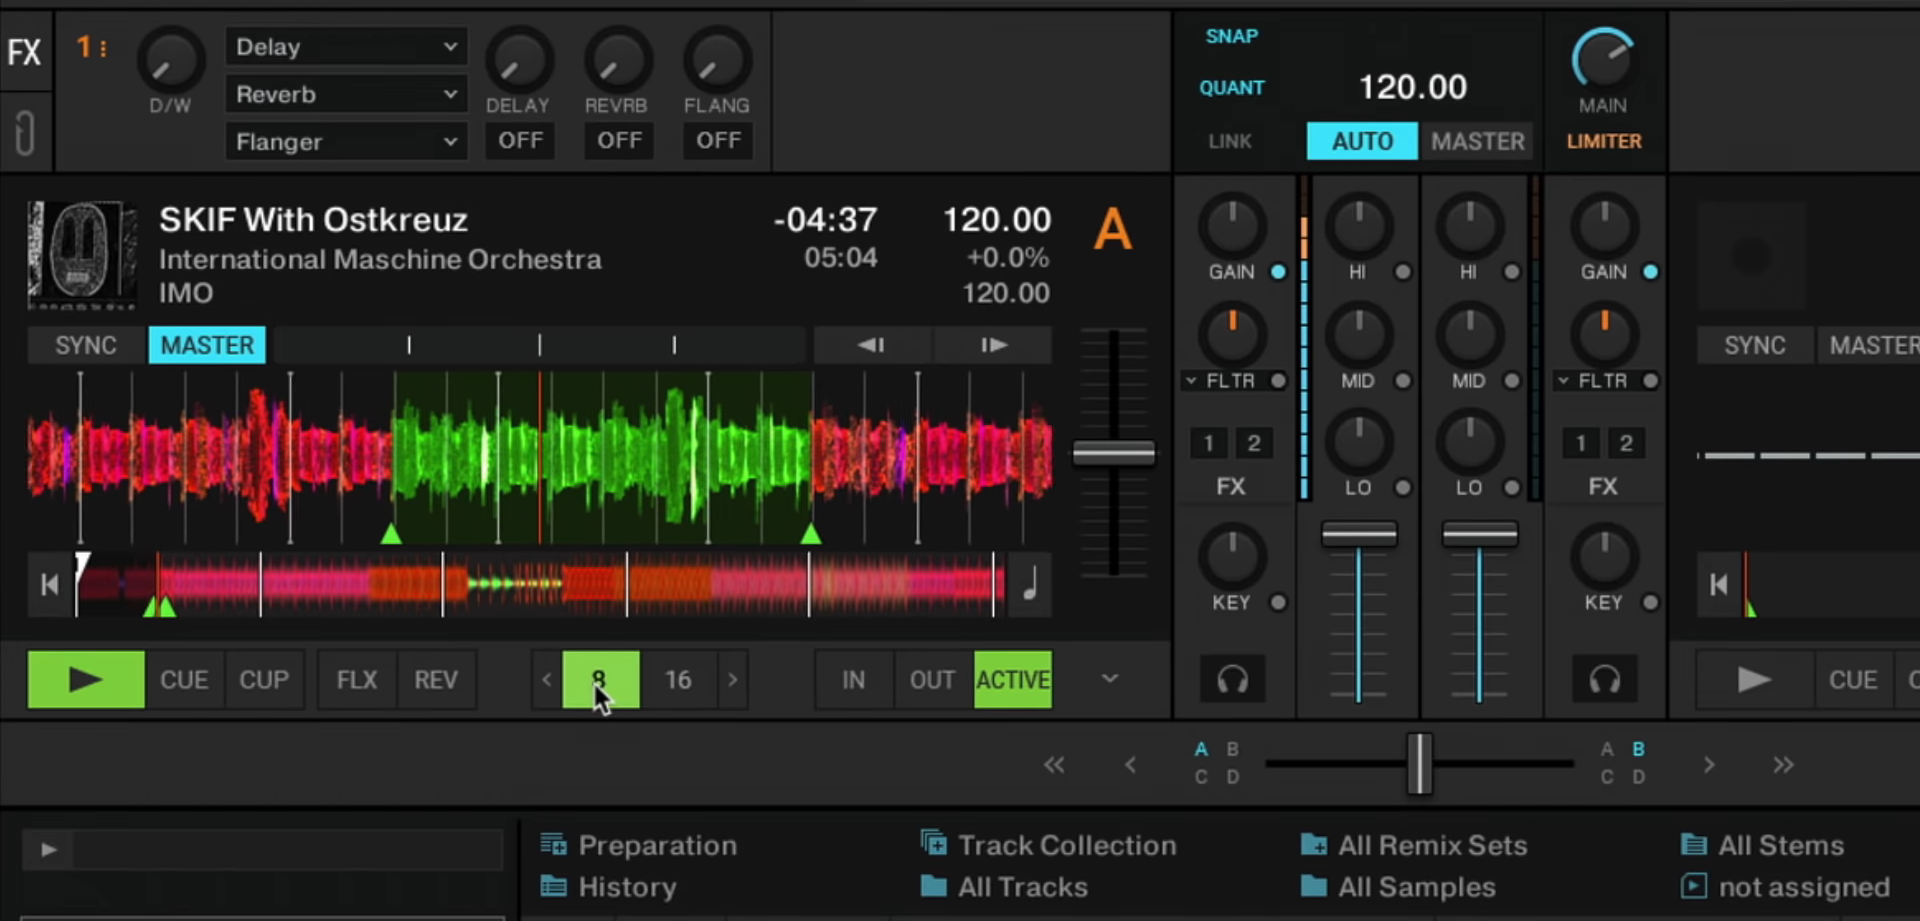 10 Best Audio Mixer Software Mixing and Editing Sound